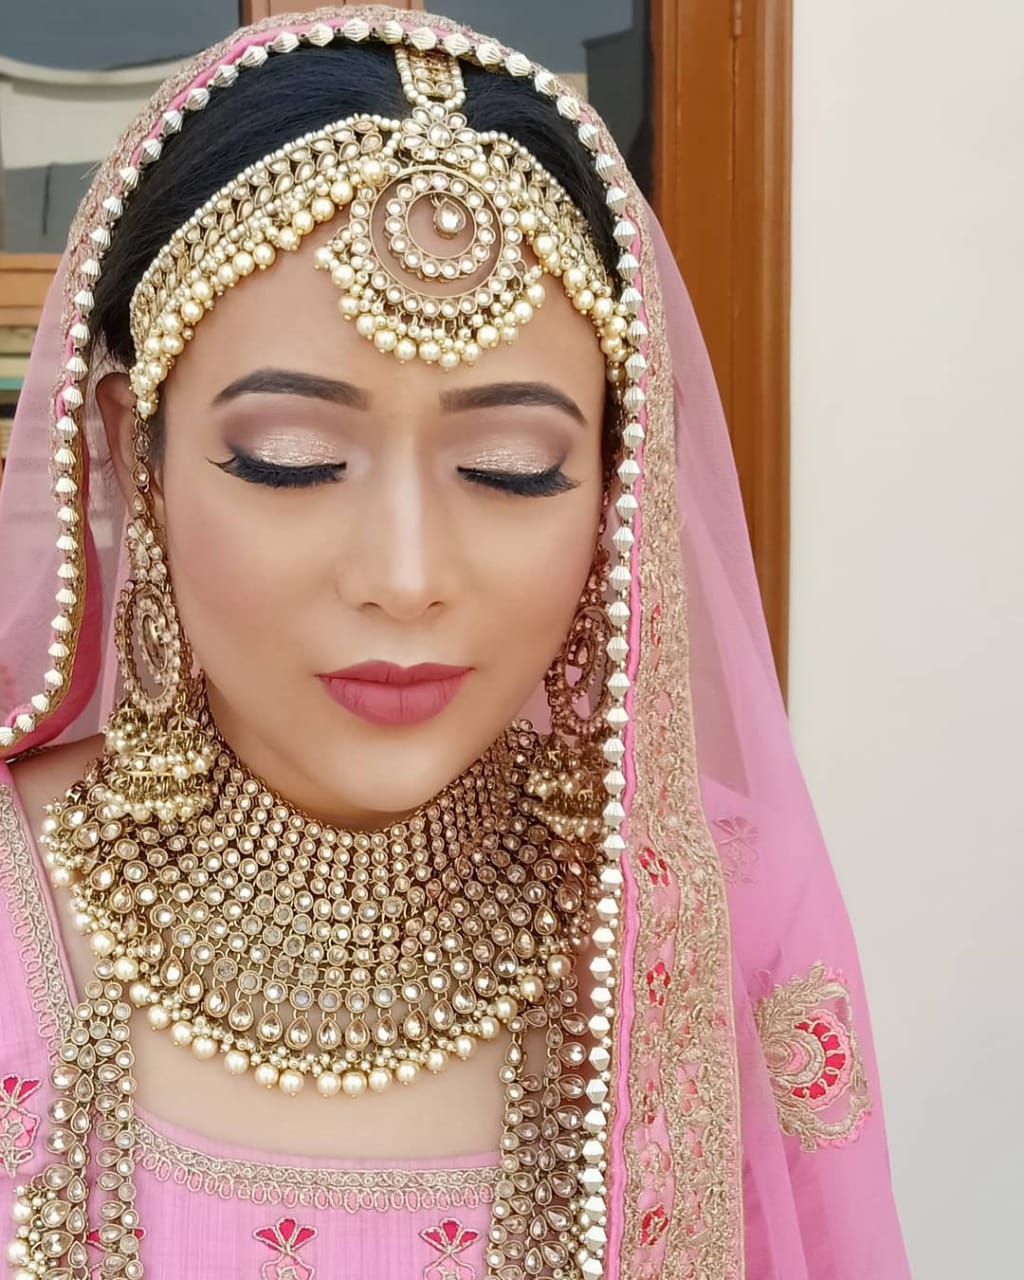 Shubh Sidhu Makeup Artist Services, Review and Info - Olready